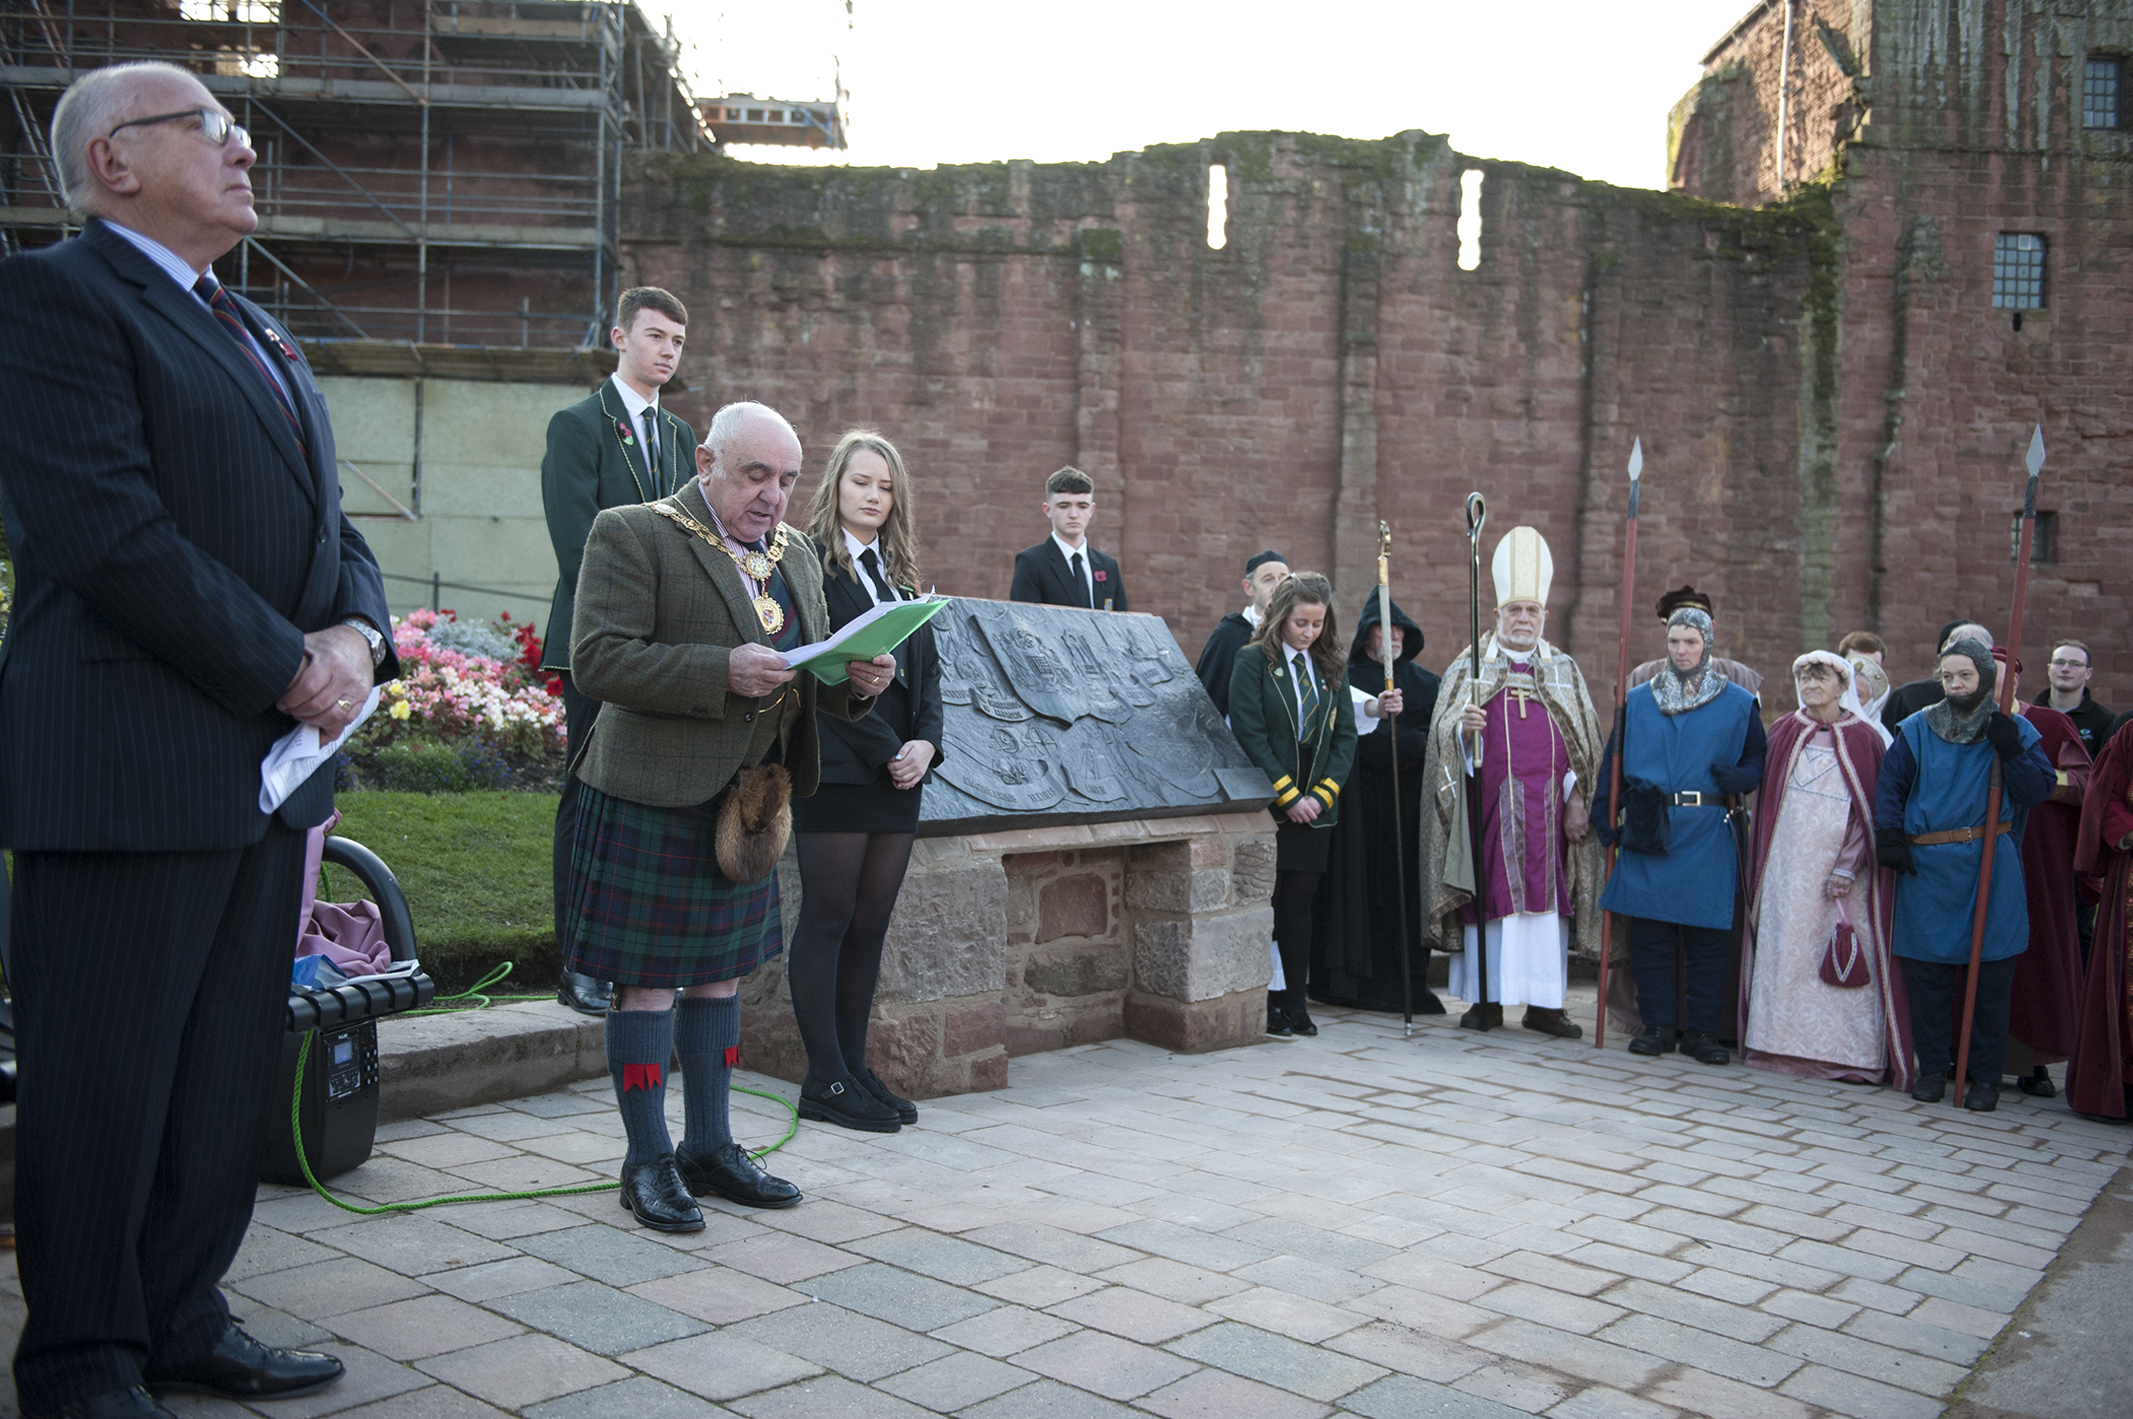 Provost Ronnie Proctor giving a speech at the unveiling.